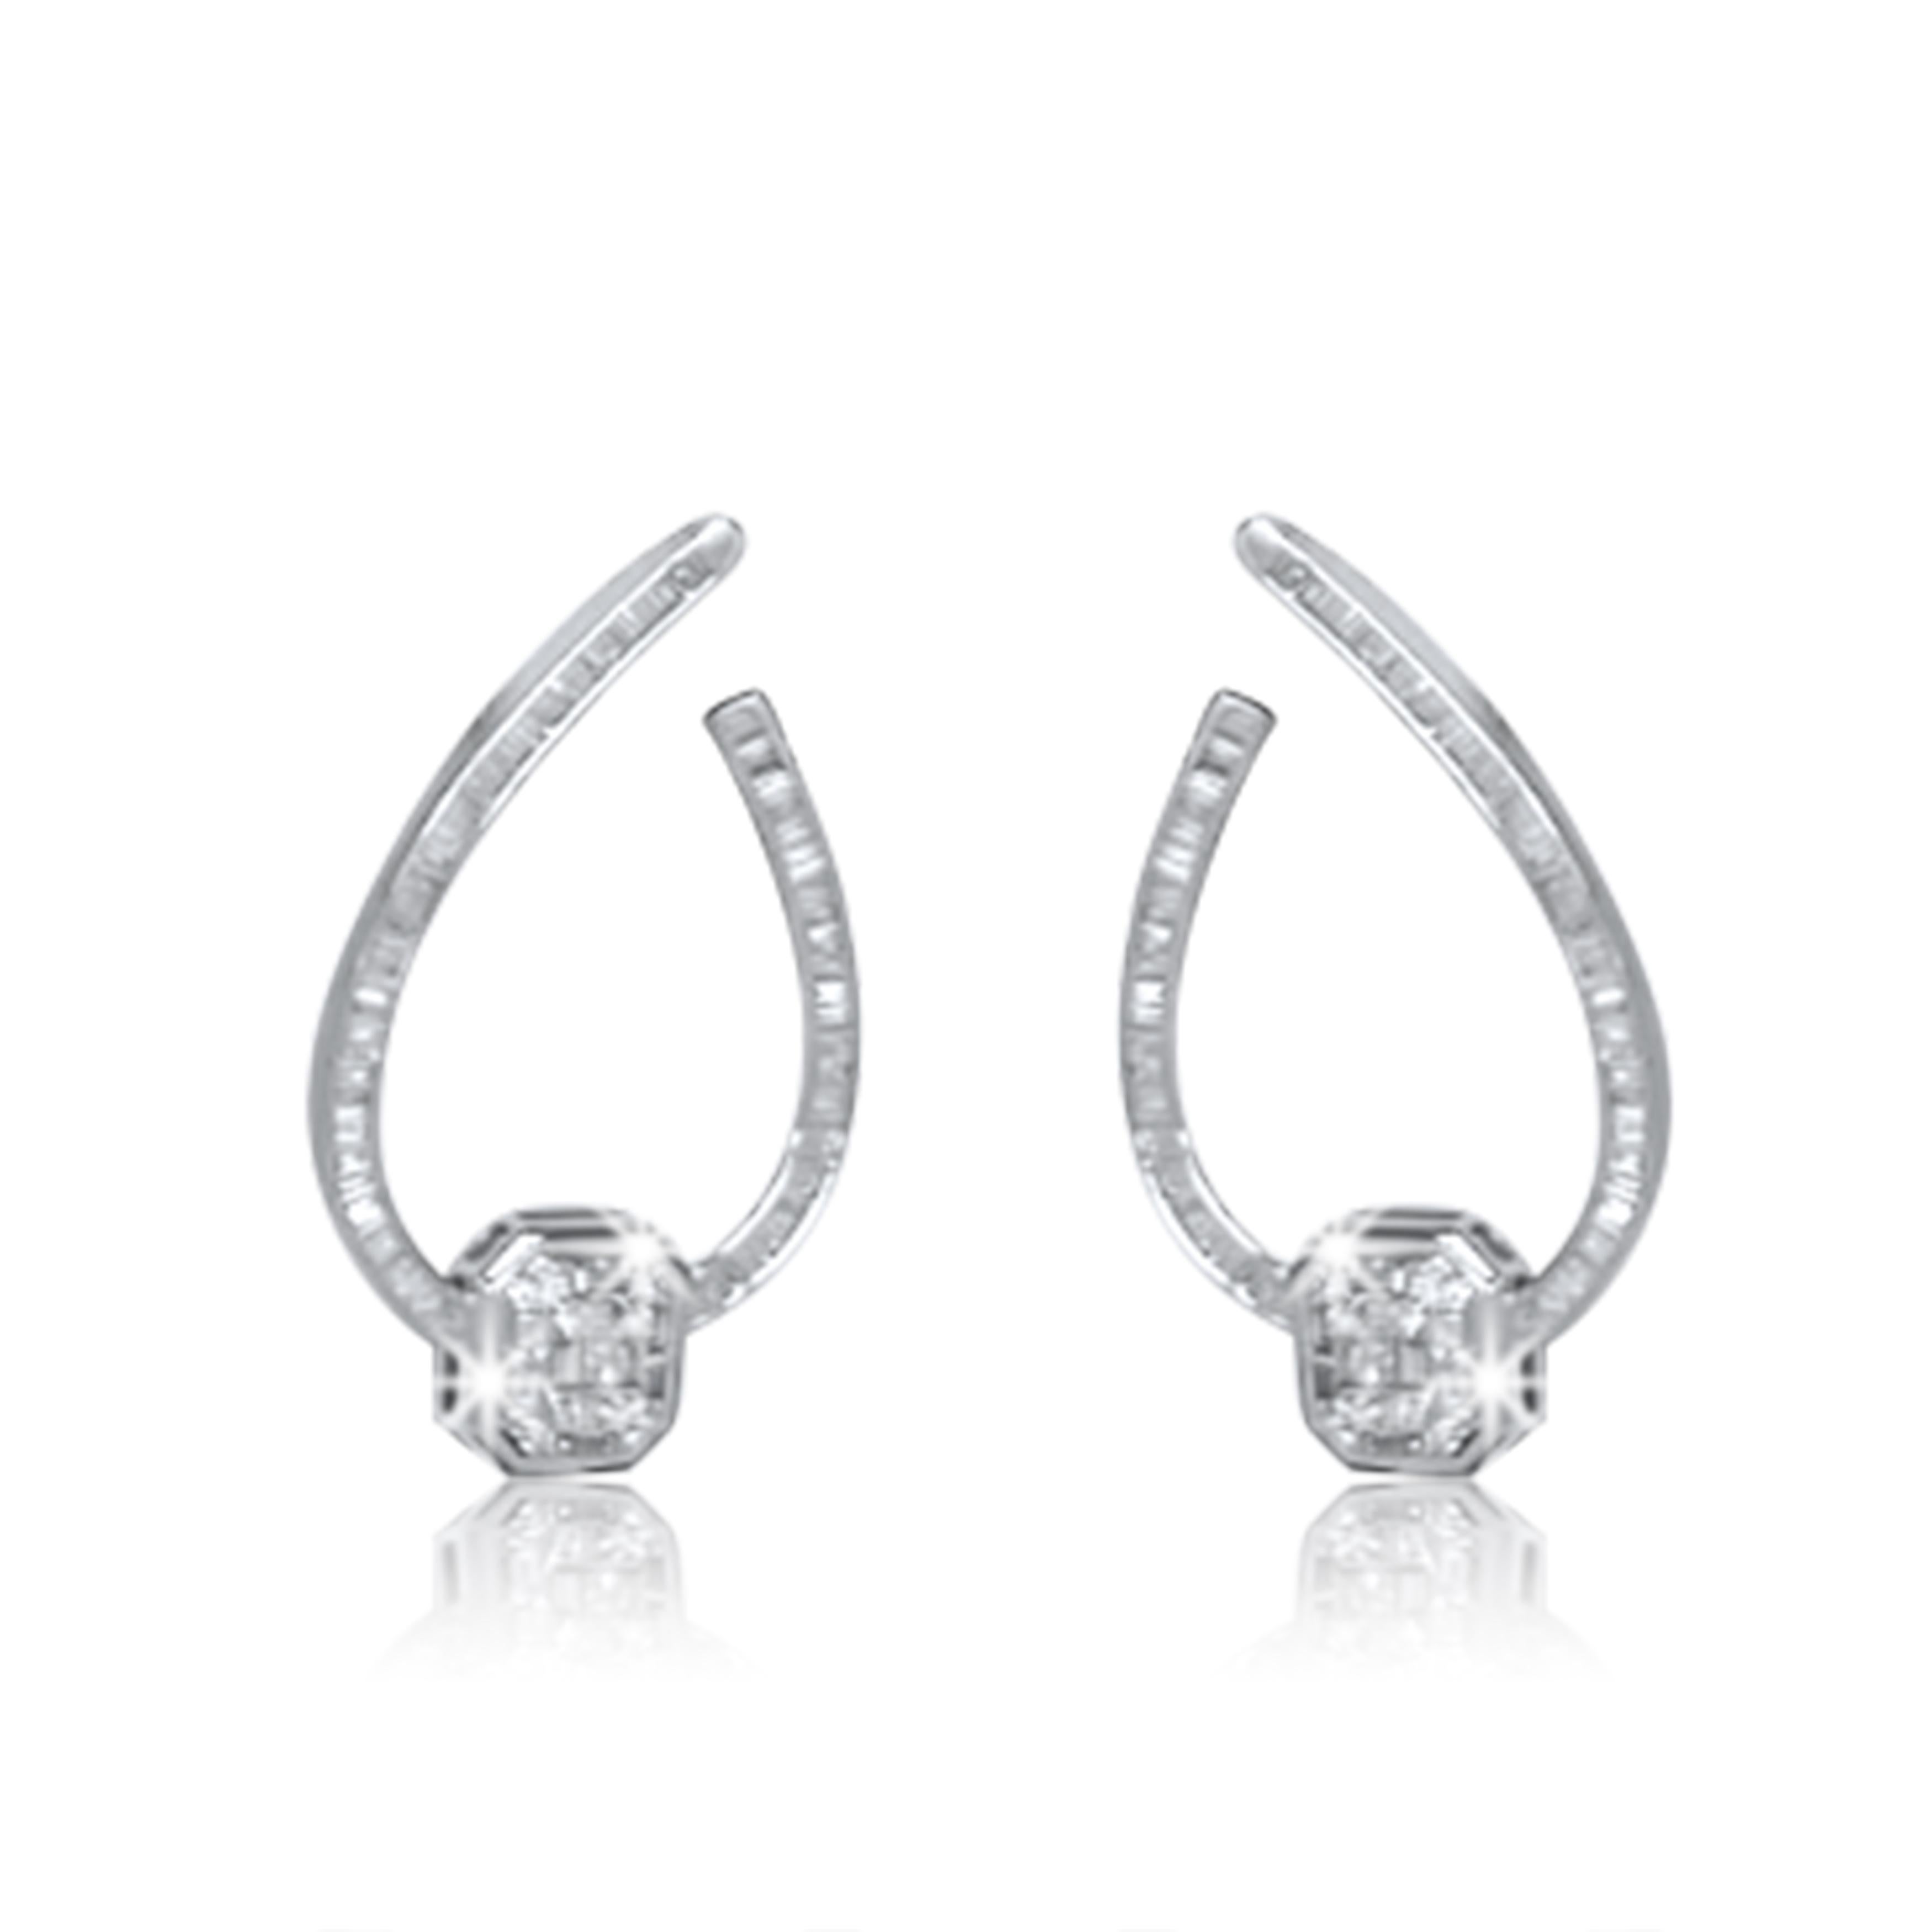 Earrings Information
Metal Purity : 18K
White Gold
Gold Weight : 11.88g
Diamond Count : 16 Round Diamonds
Round Diamond Carat Weight : 0.21 ttcw
Baguette Diamonds Count : 180
Baguette Diamonds Carat Weight : 2.34 ttcw
Serial #EA18574

Sophie's